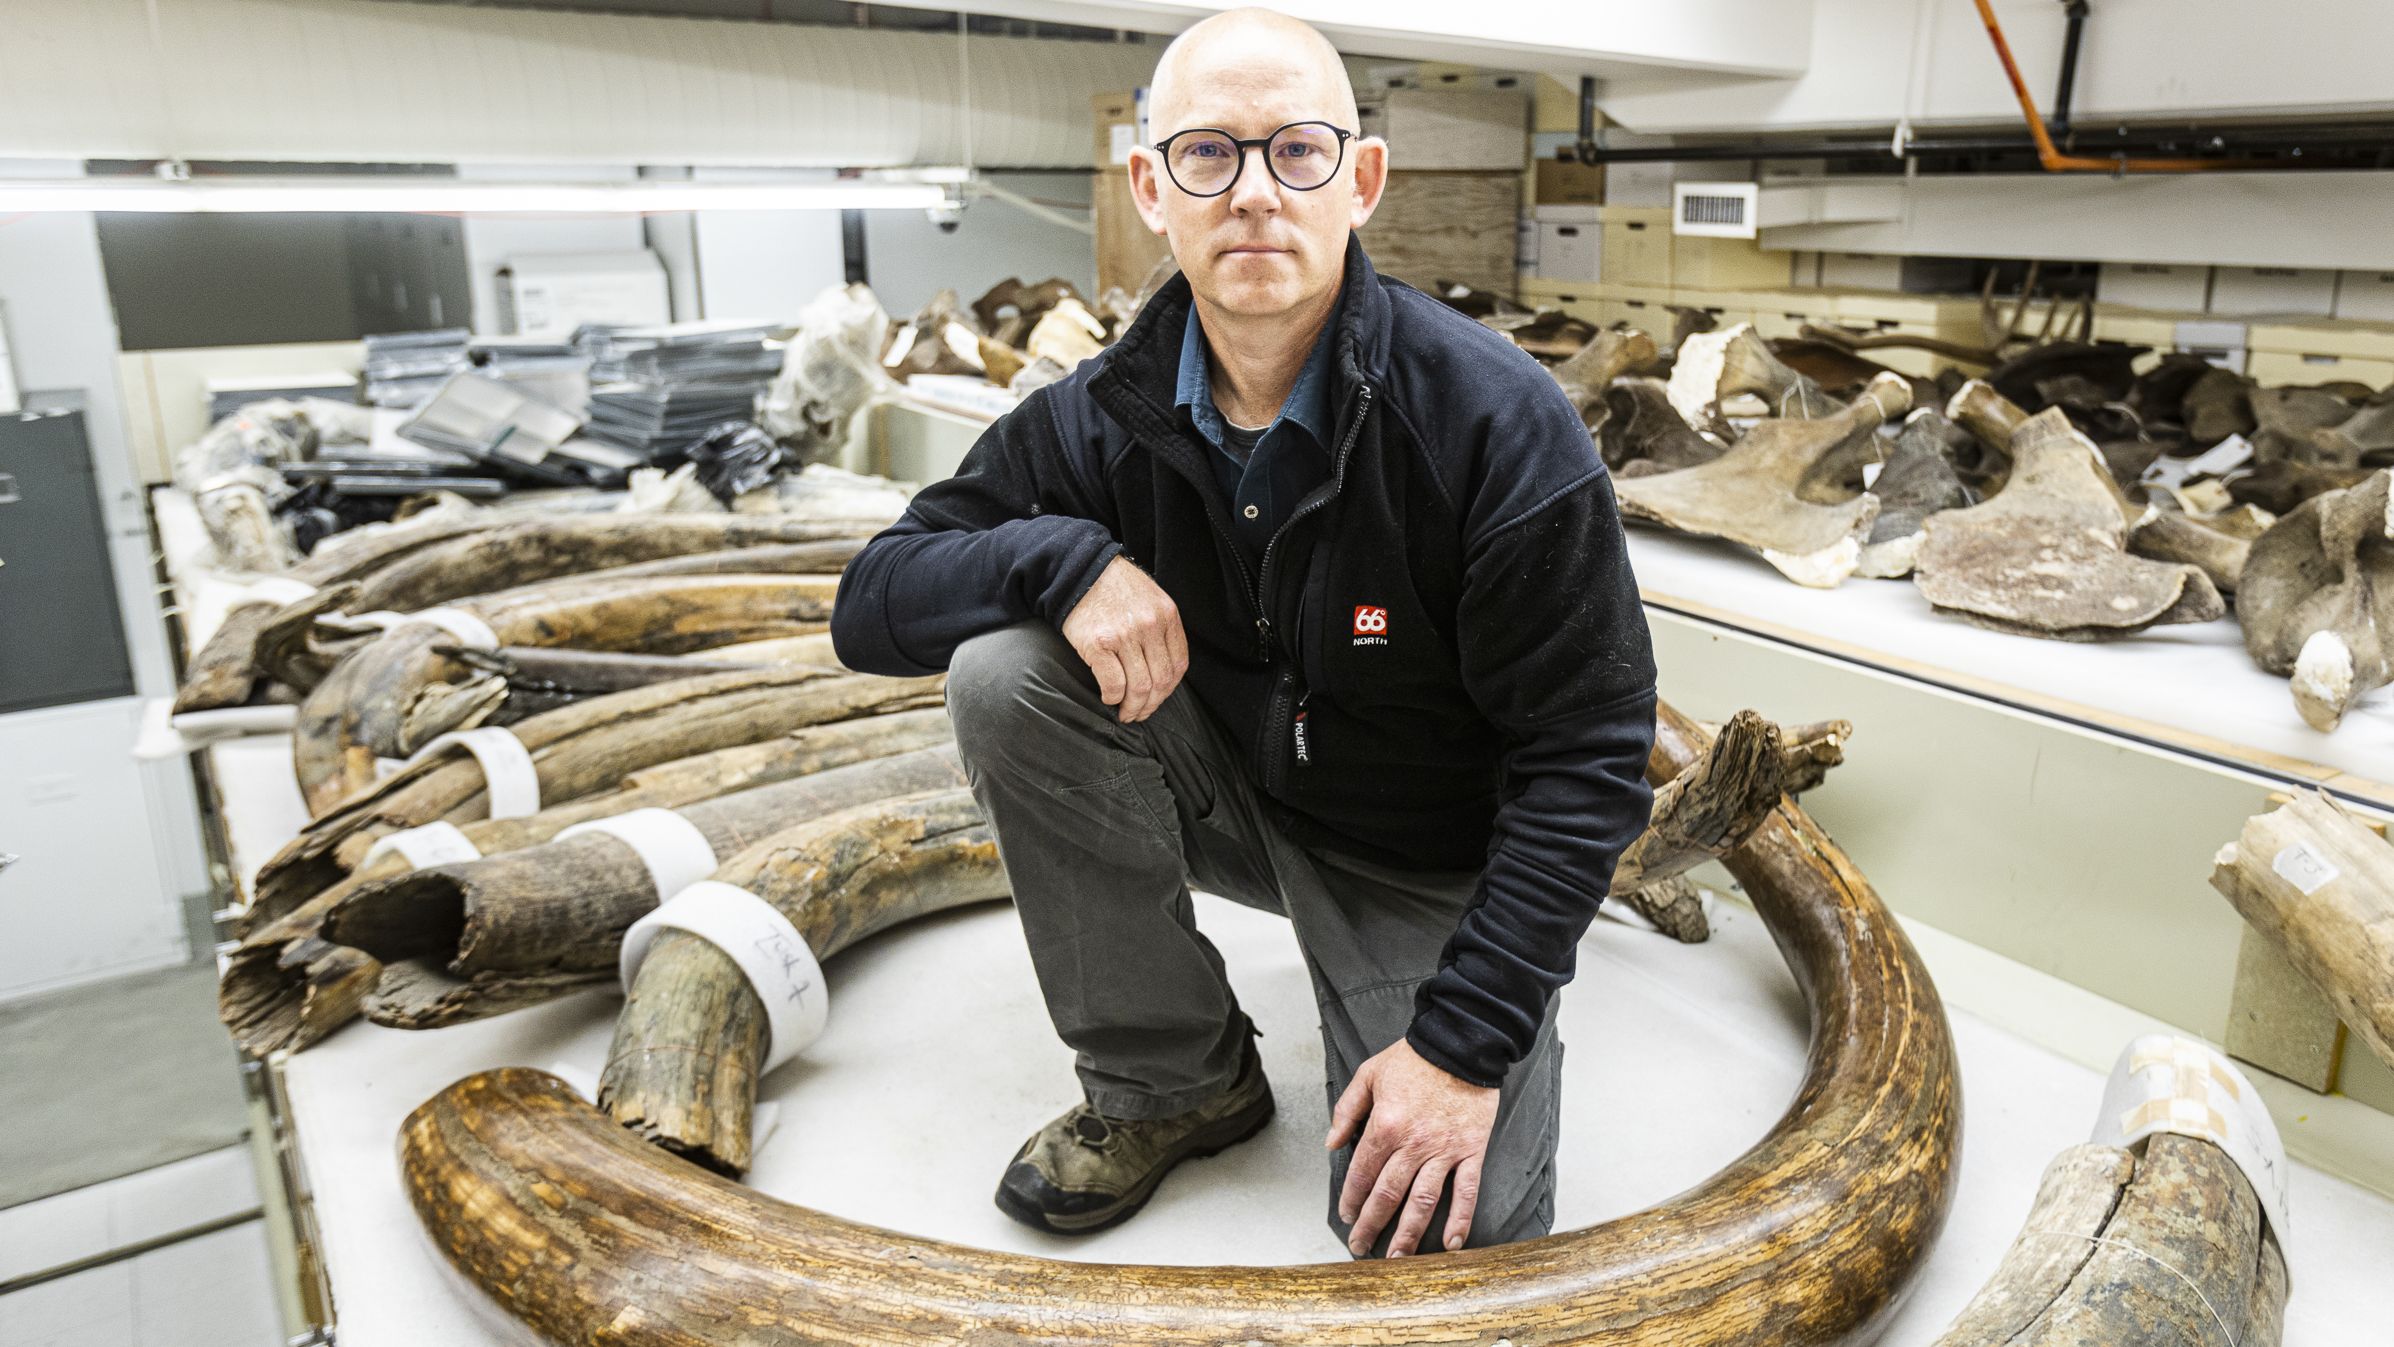 Matthew Wooller of the University of Alaska Fairbanks kneels among a collection of some of the mammoth tusks at the University of Alaska Museum of the North.